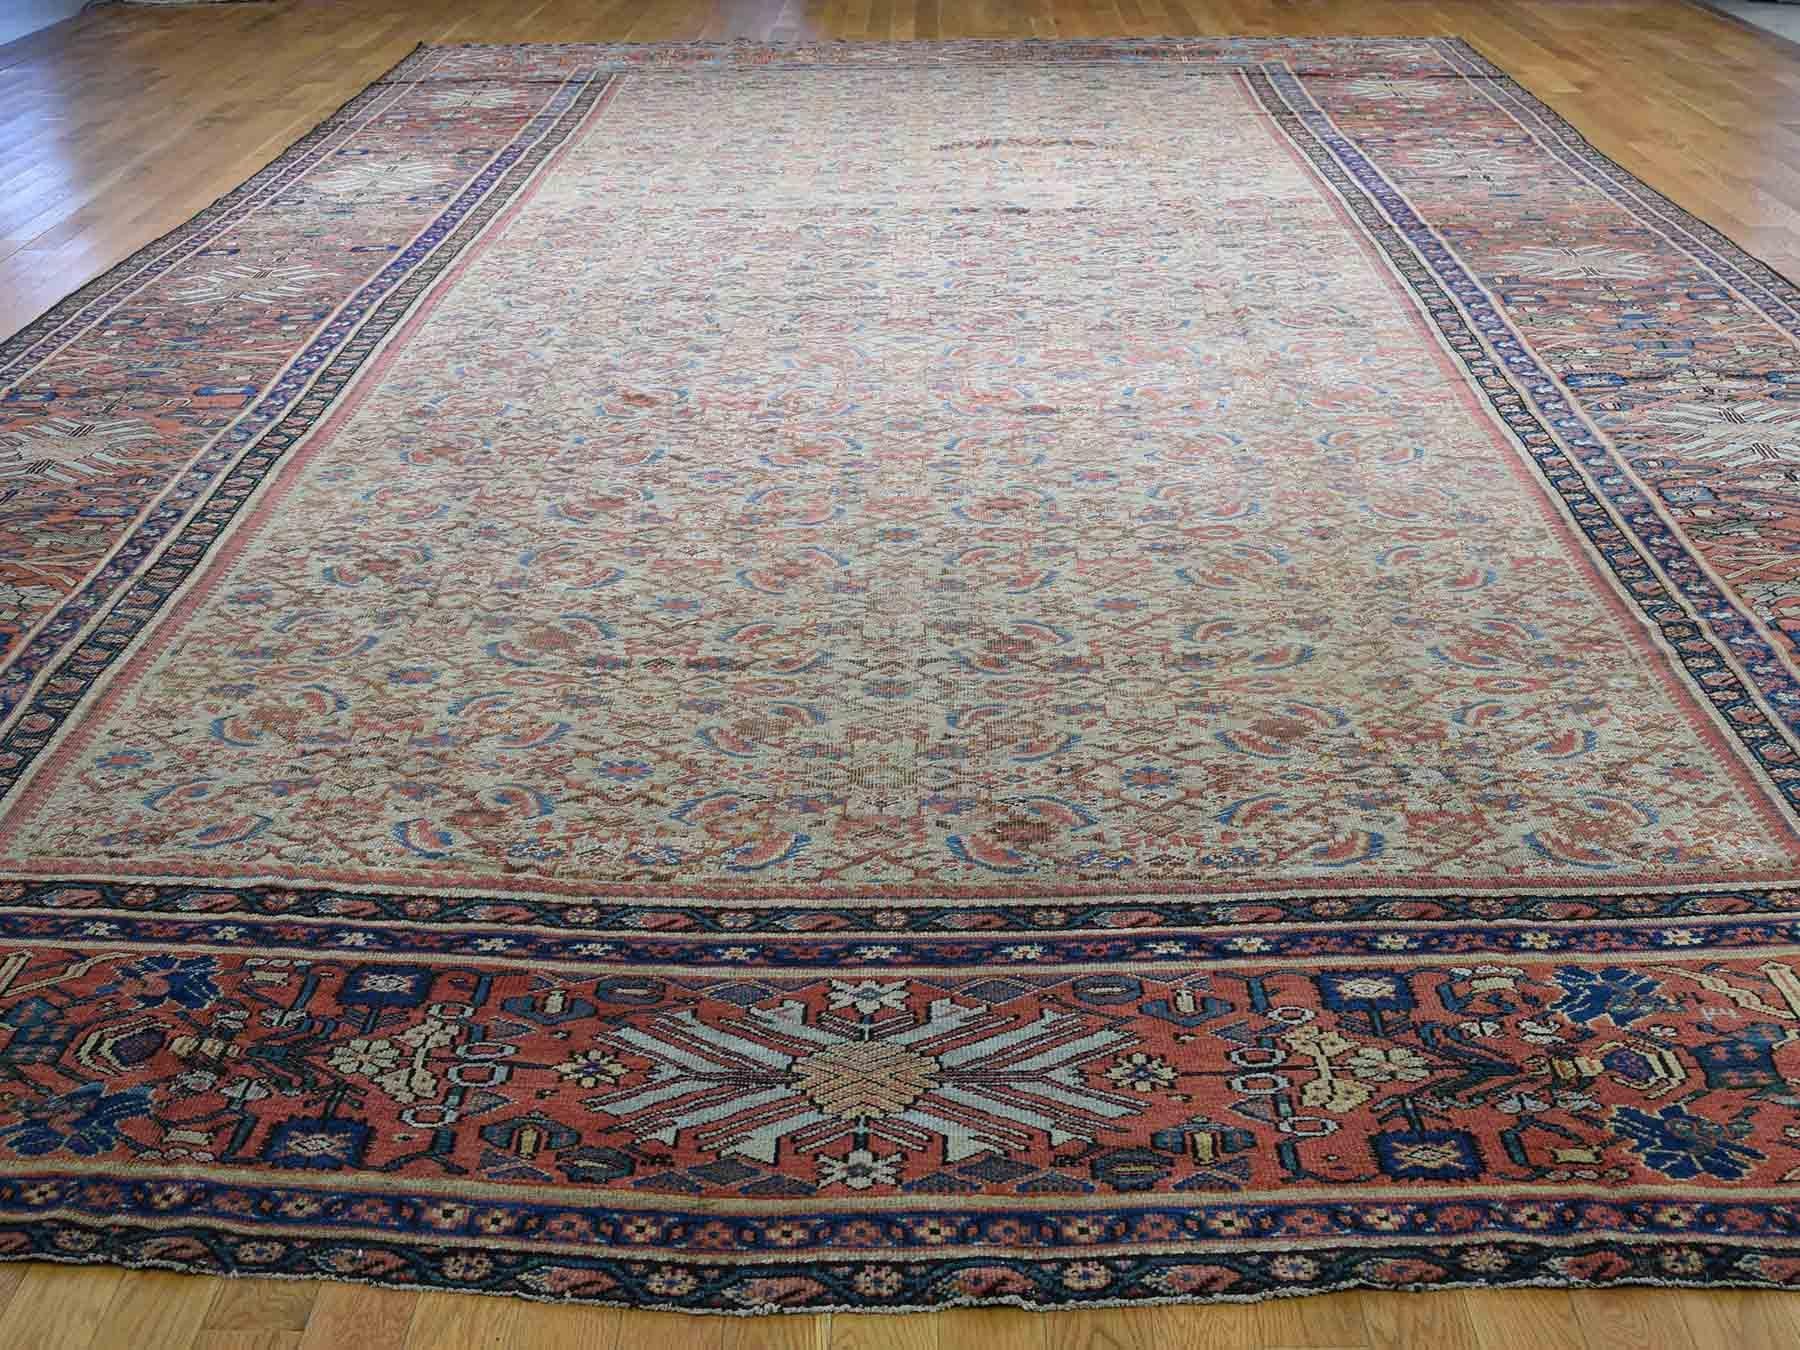 This is a genuine hand knotted oriental rug. It is not hand tufted or machine made rug. Our entire inventory is made of either hand knotted or handwoven rugs.

Enhance your home with this magnificent antique carpet. This handcrafted Persian Mahal